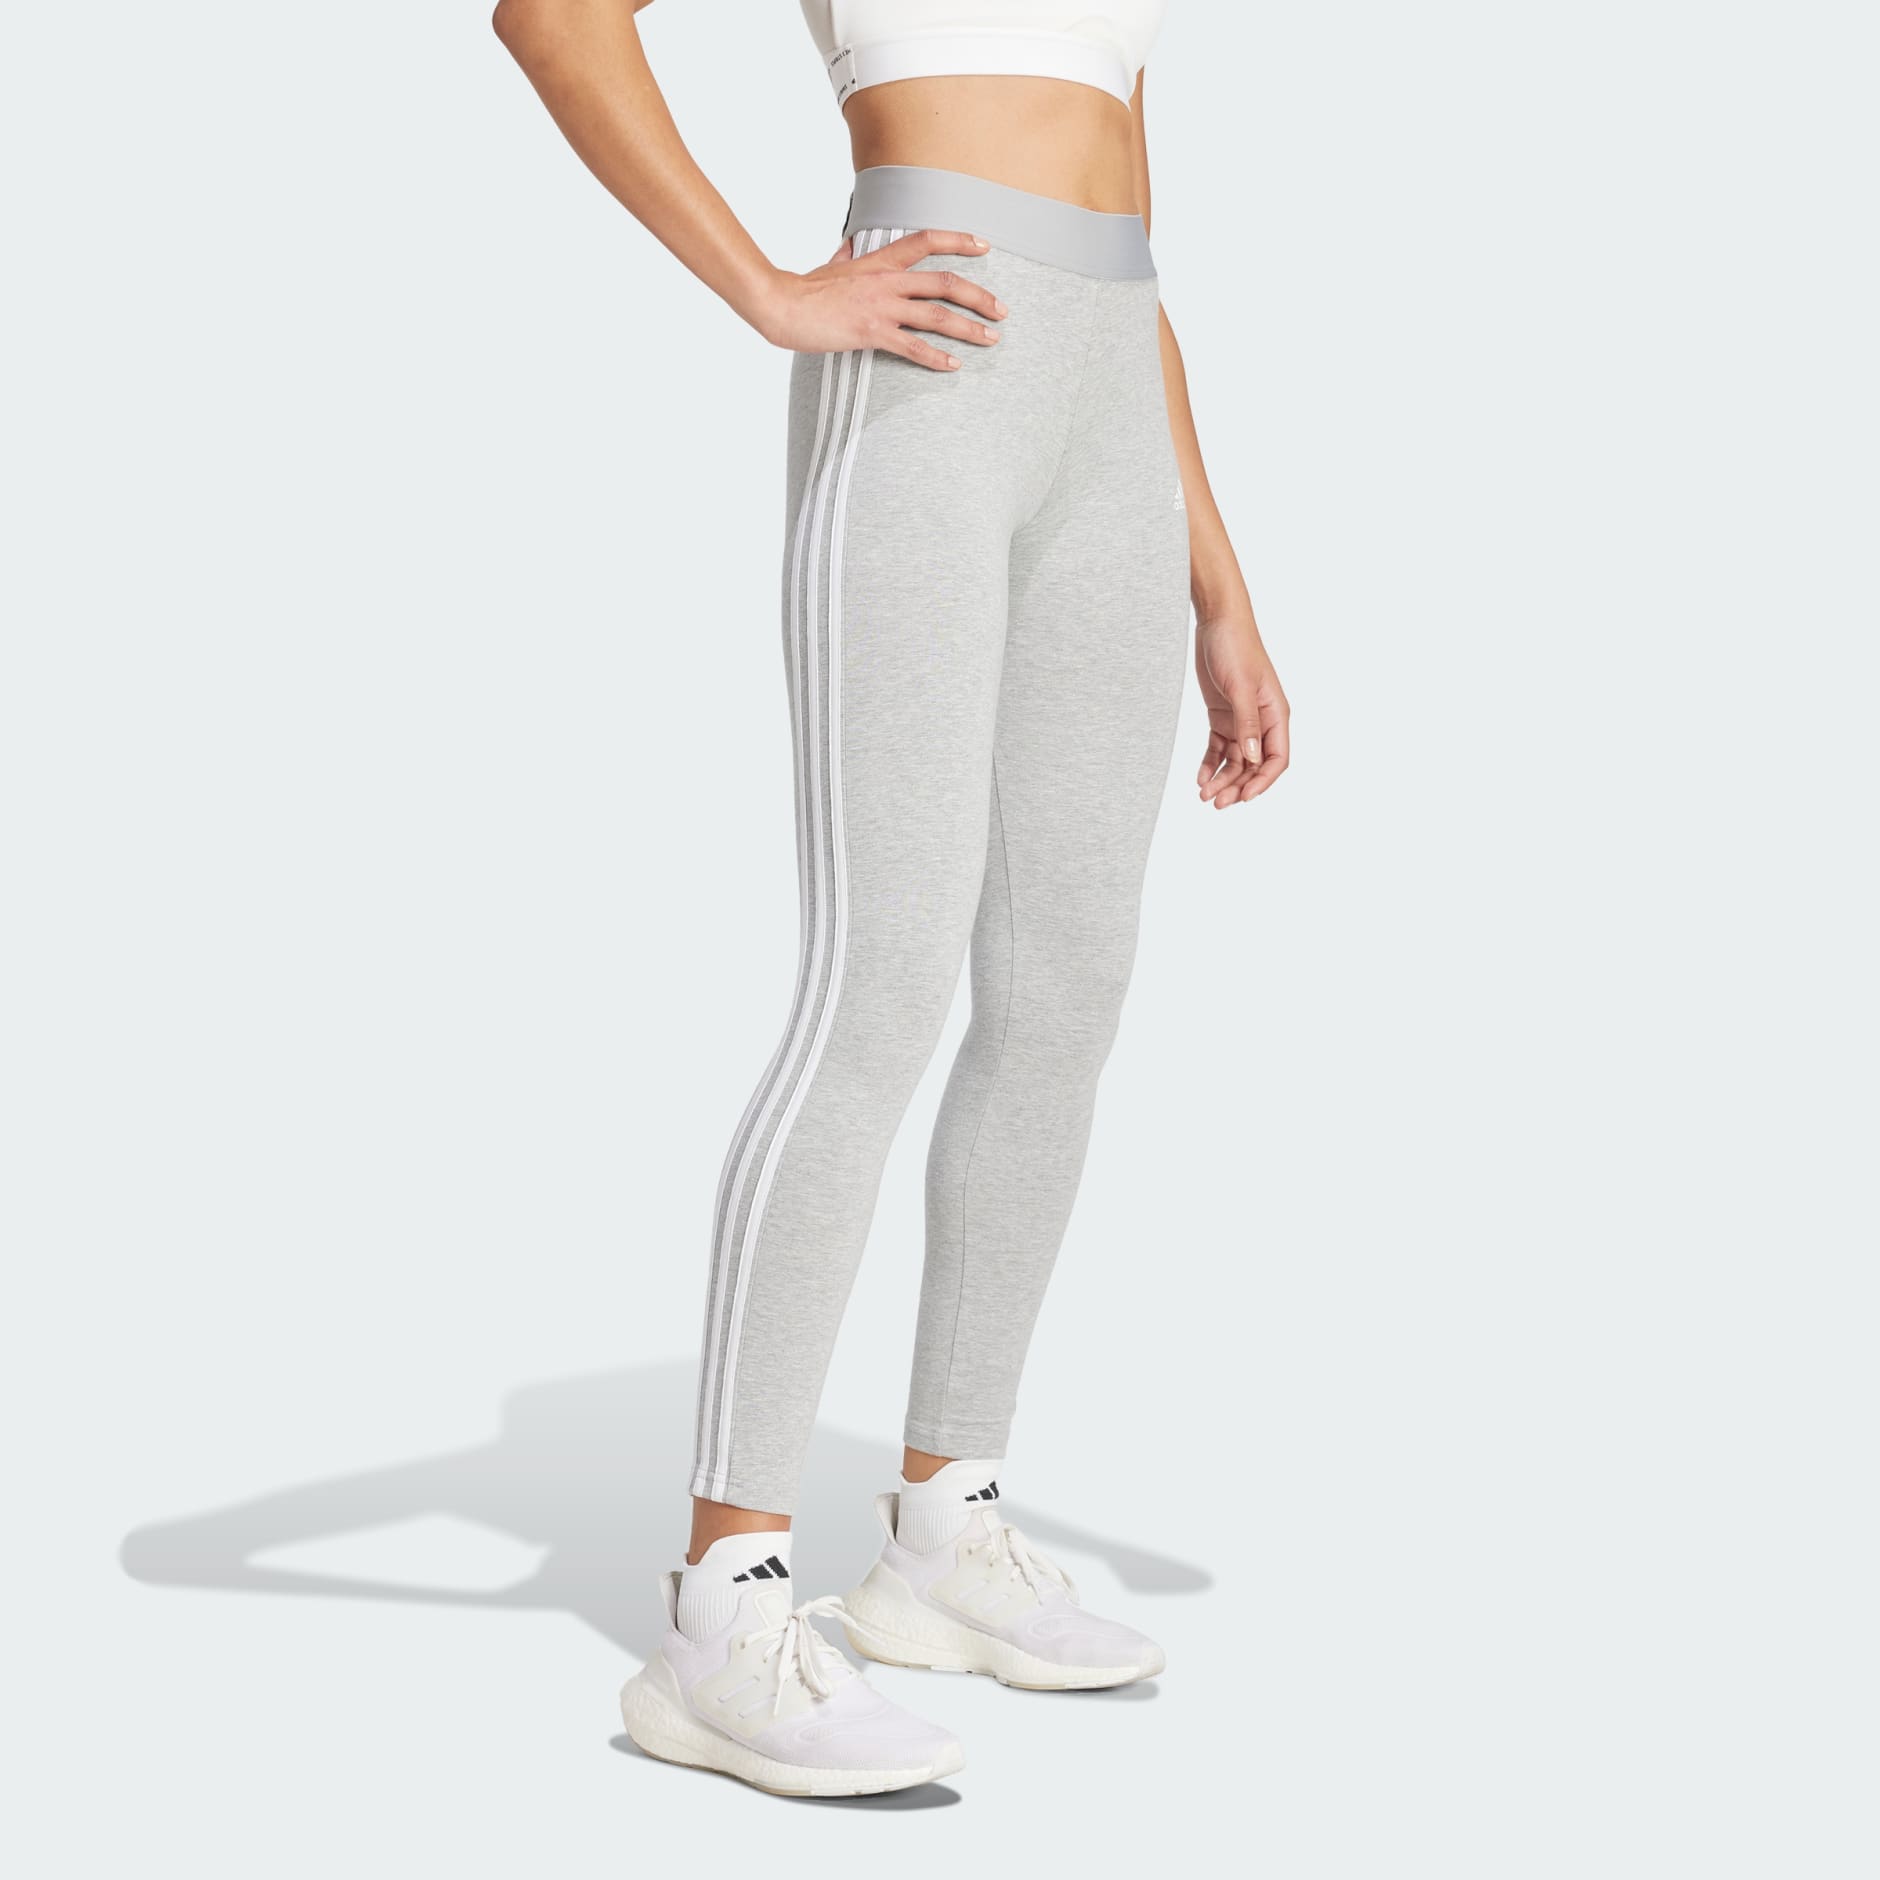 Adidas Yoga Pants India | International Society of Precision Agriculture